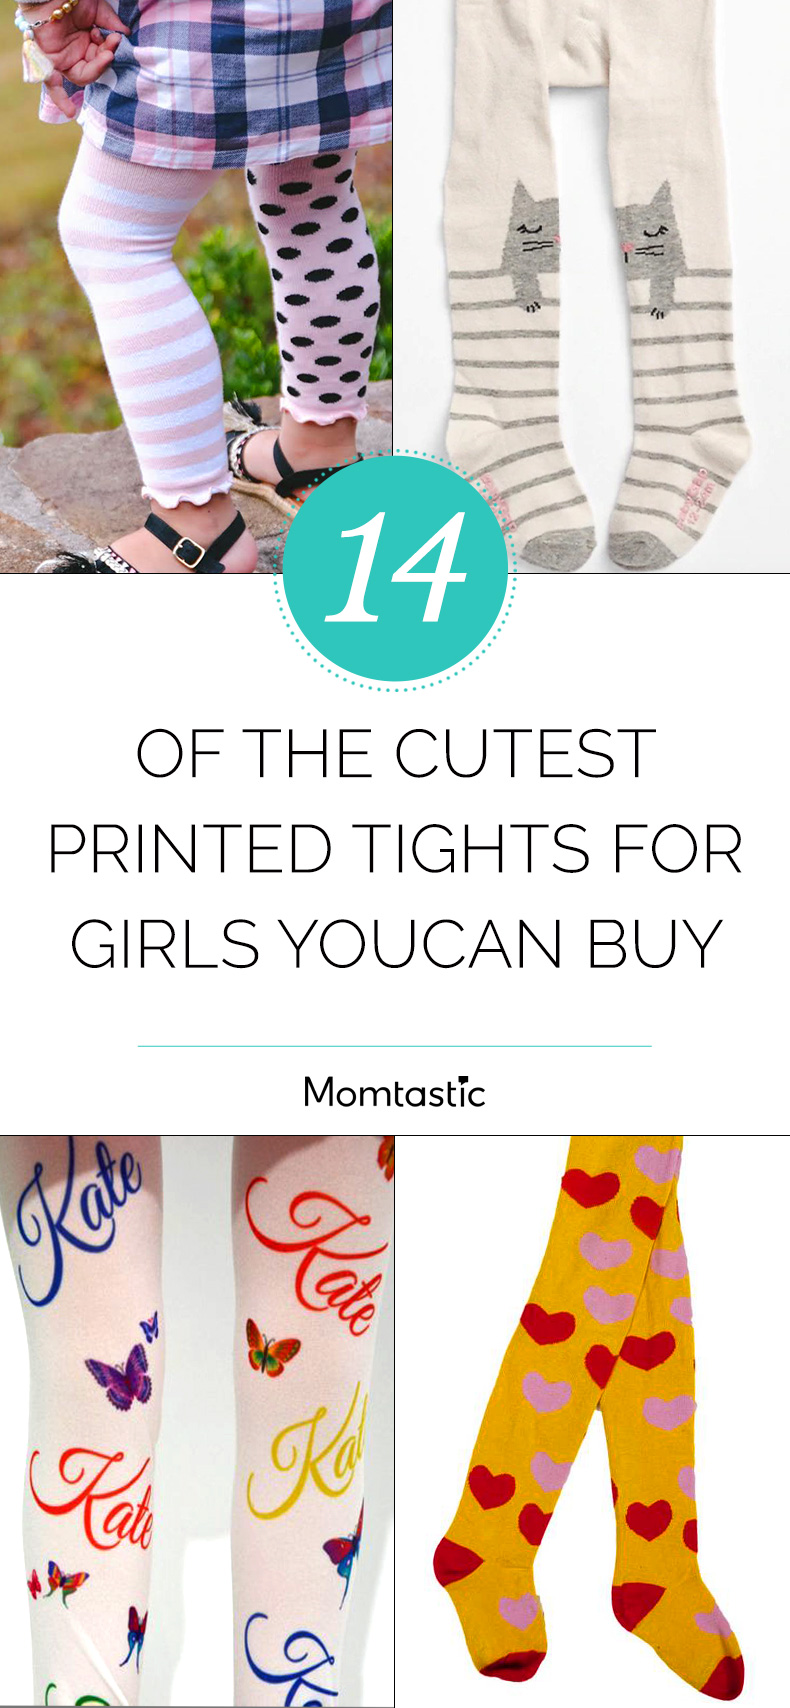 14 of the Cutest Printed Tights for Girls You Can Buy